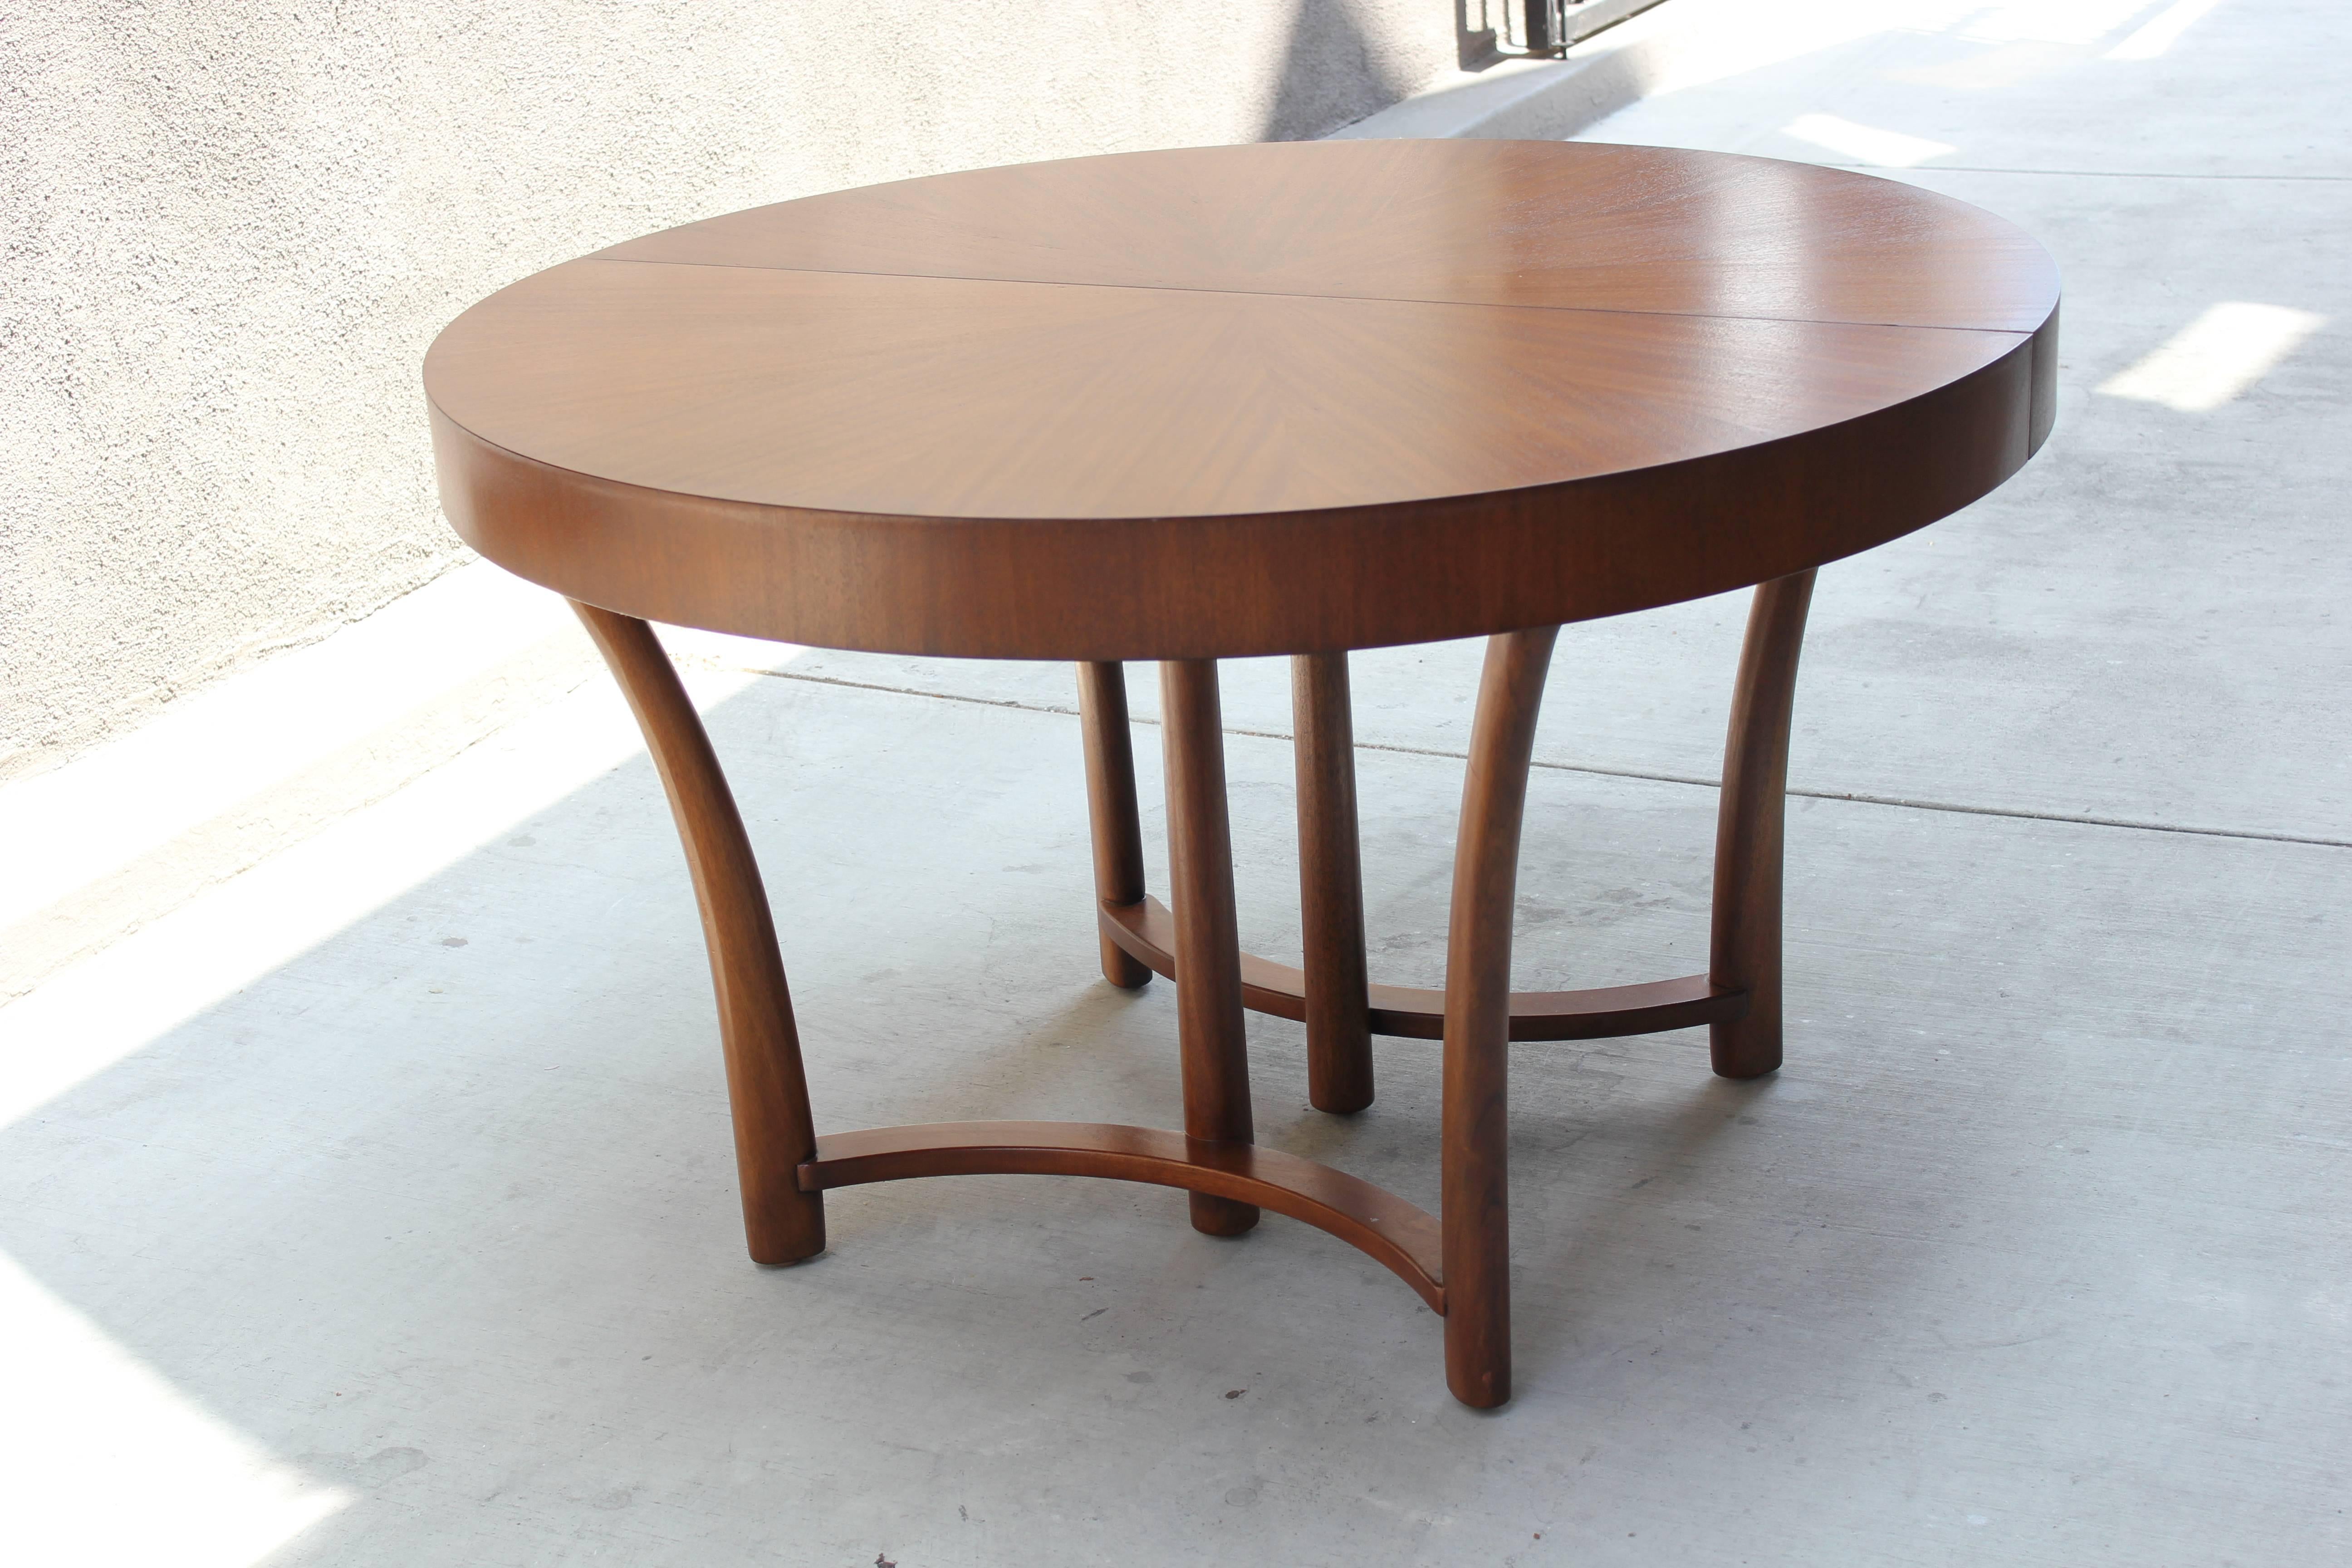 T.H. Robsjohn-Gibbings Style Dining Table By Widdicomb, circa 1938 In Excellent Condition For Sale In Los Angeles, CA